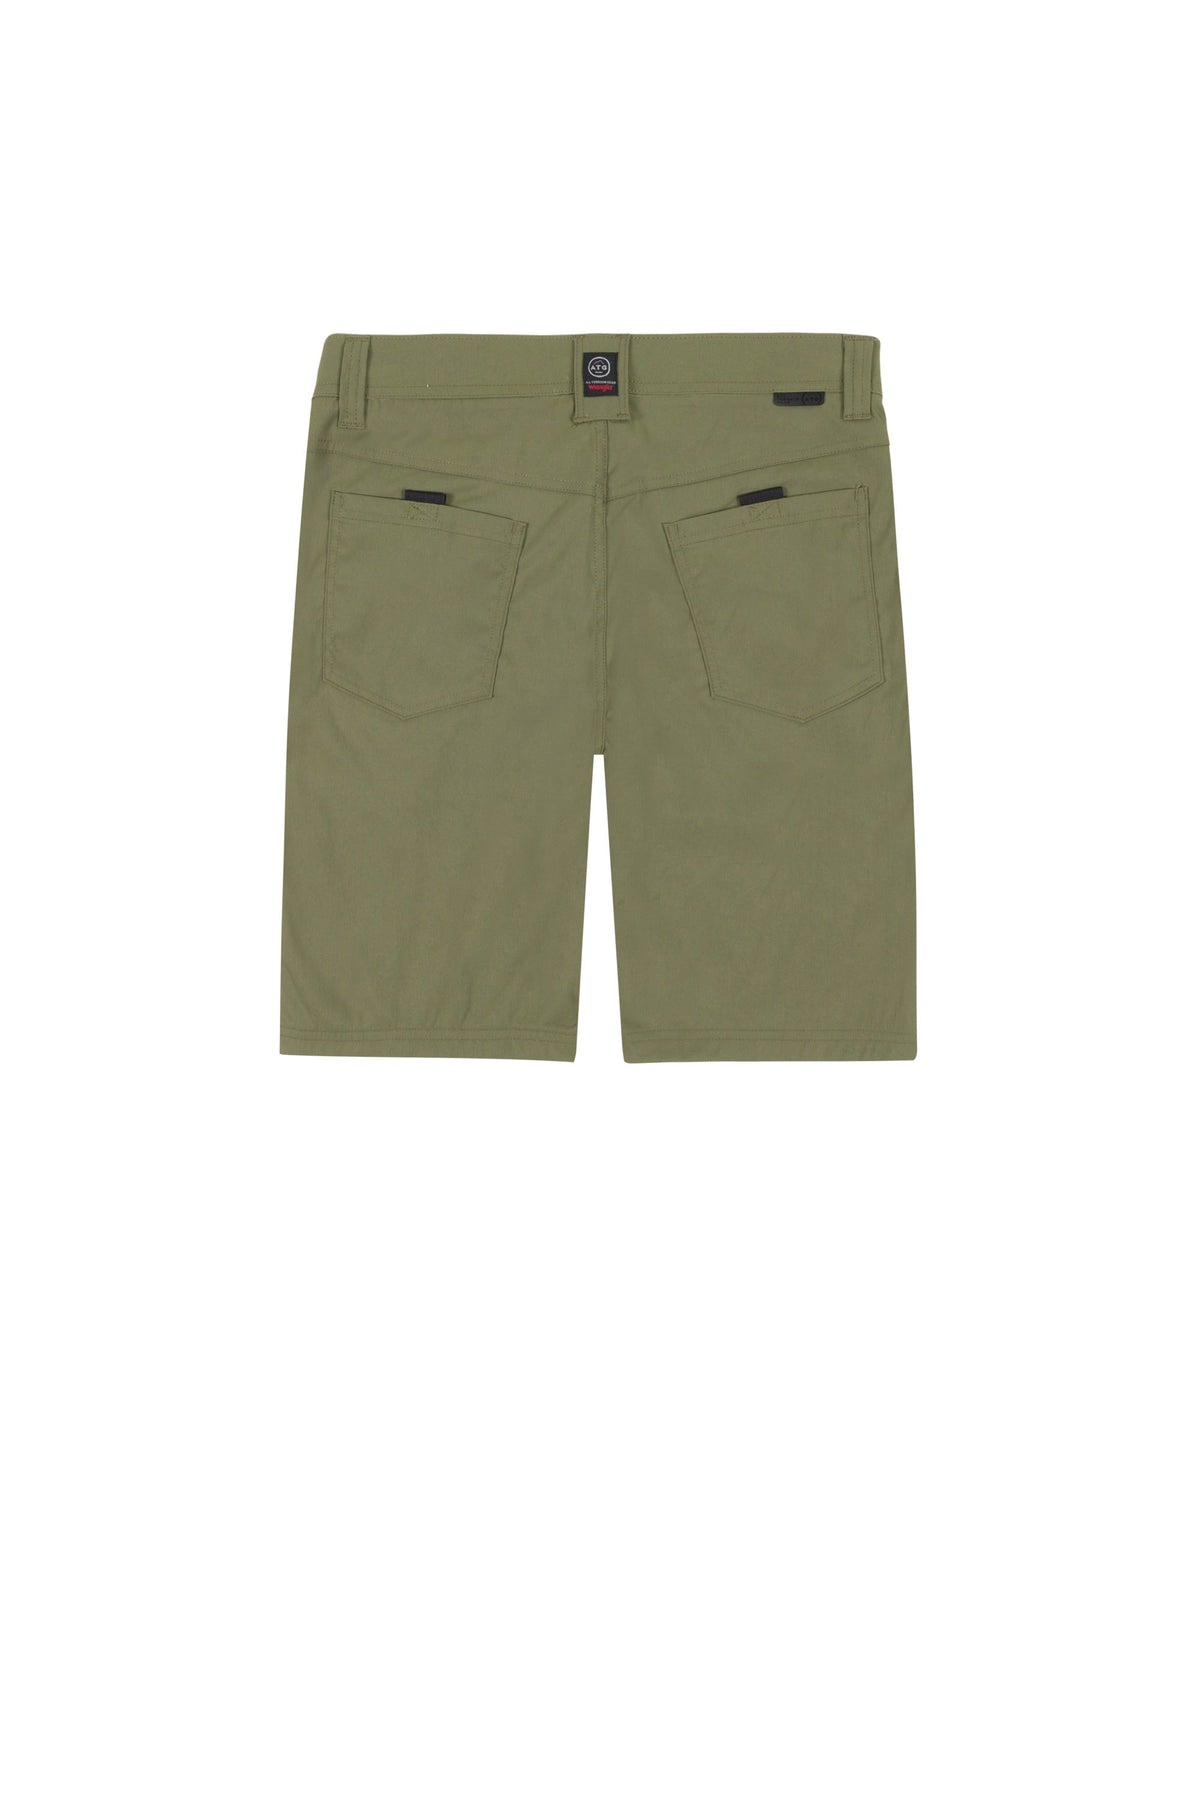 8Pkt Belted Short in Dusty Olive